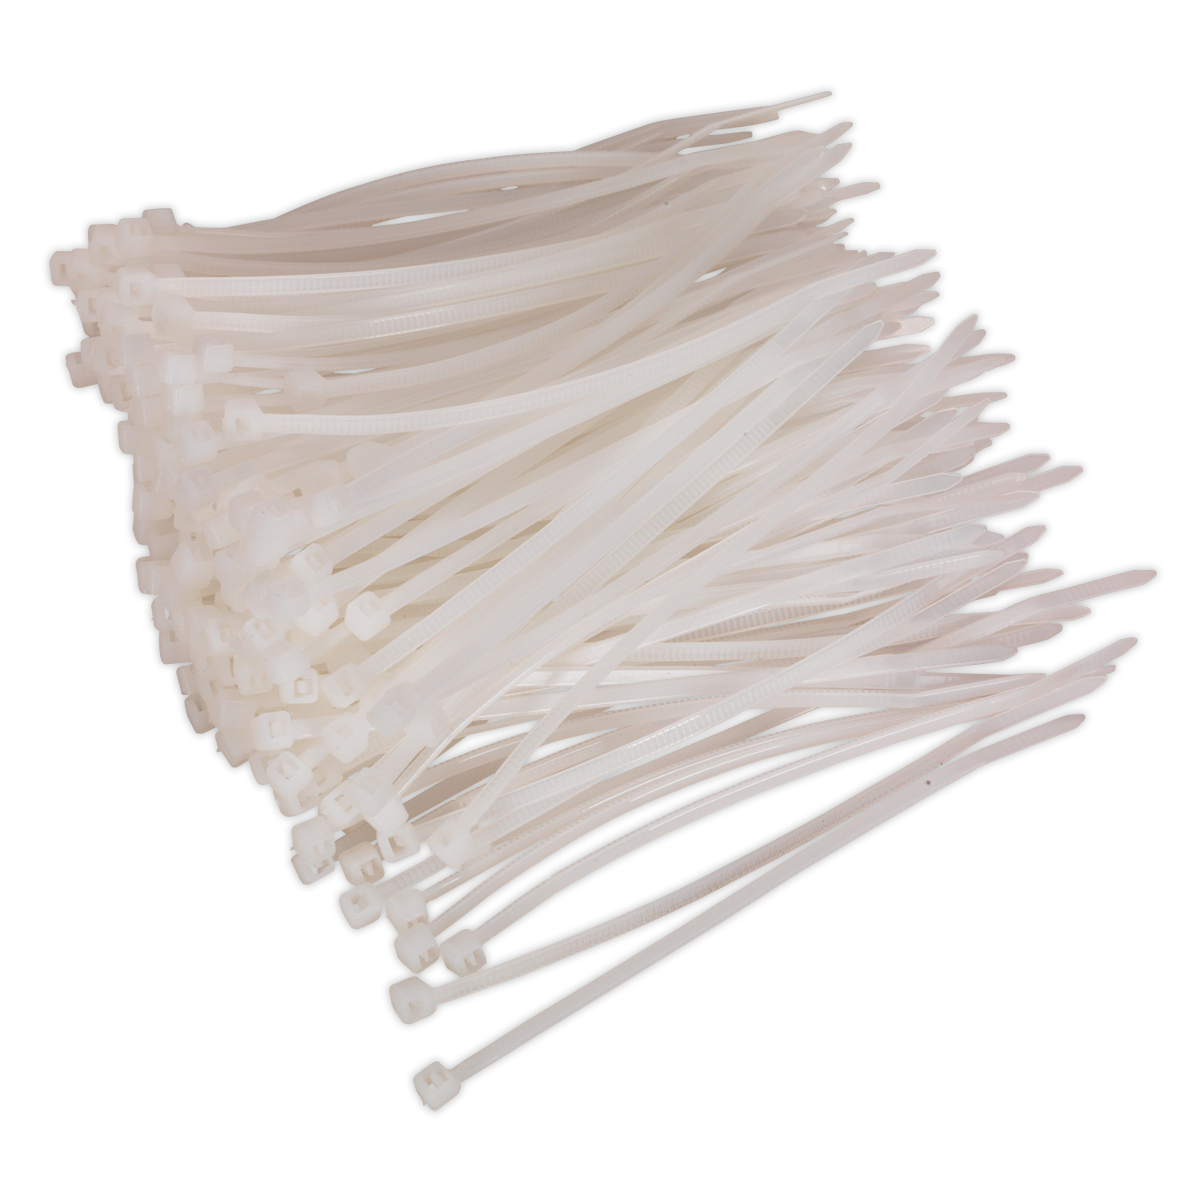 Cable Tie 100 x 2.5mm White Pack of 200 - CT10025P200W - Farming Parts